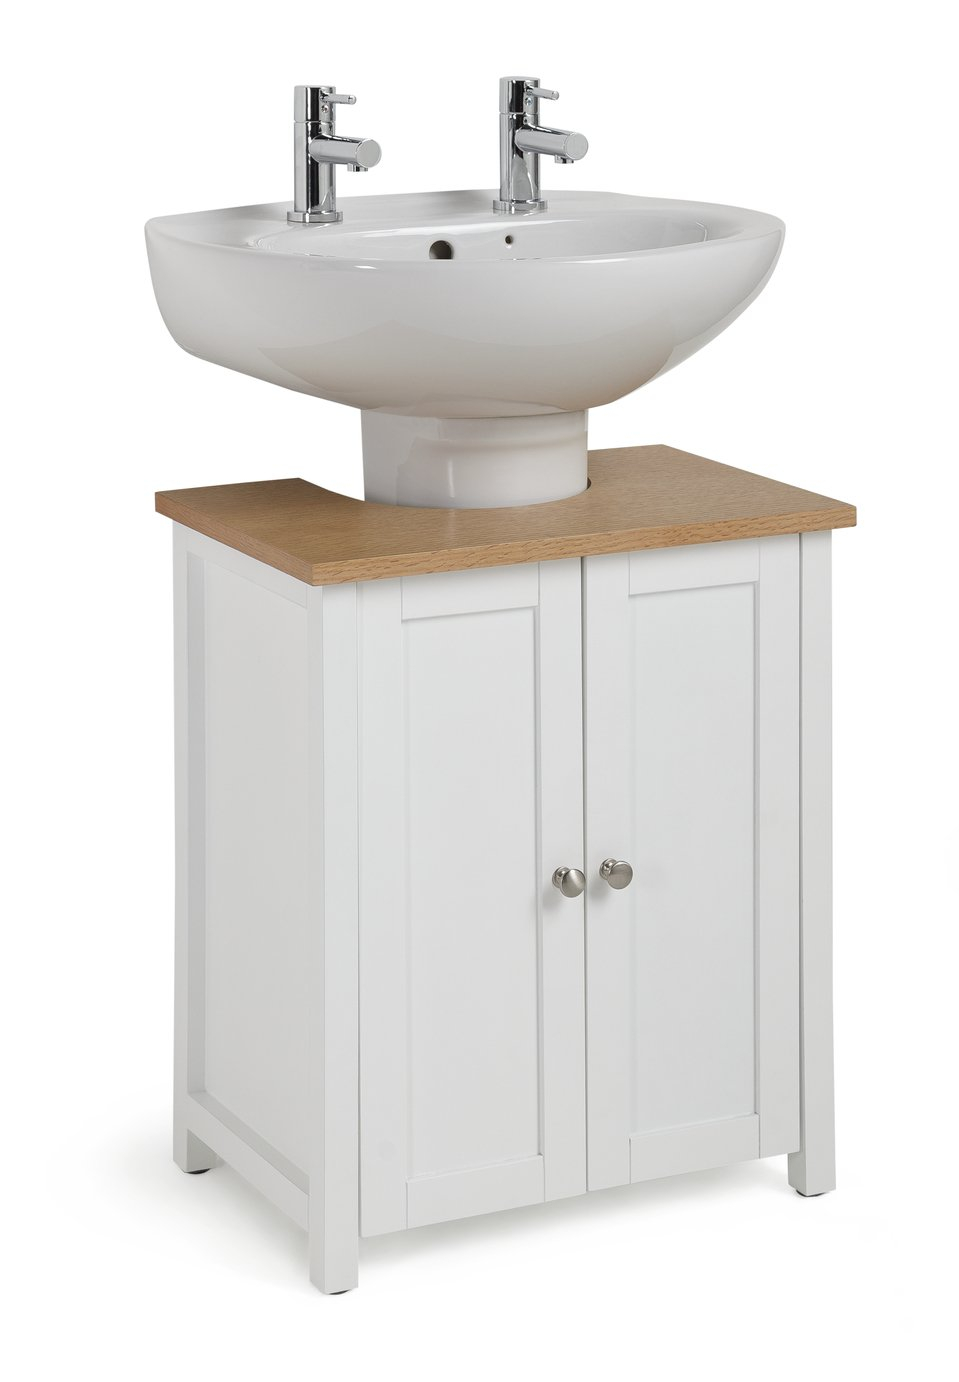 Argos Home Livingston Under Sink Cabinet 60 X 51cm In White Painted Mdf For 39 Click Collect Argos Hotukdeals